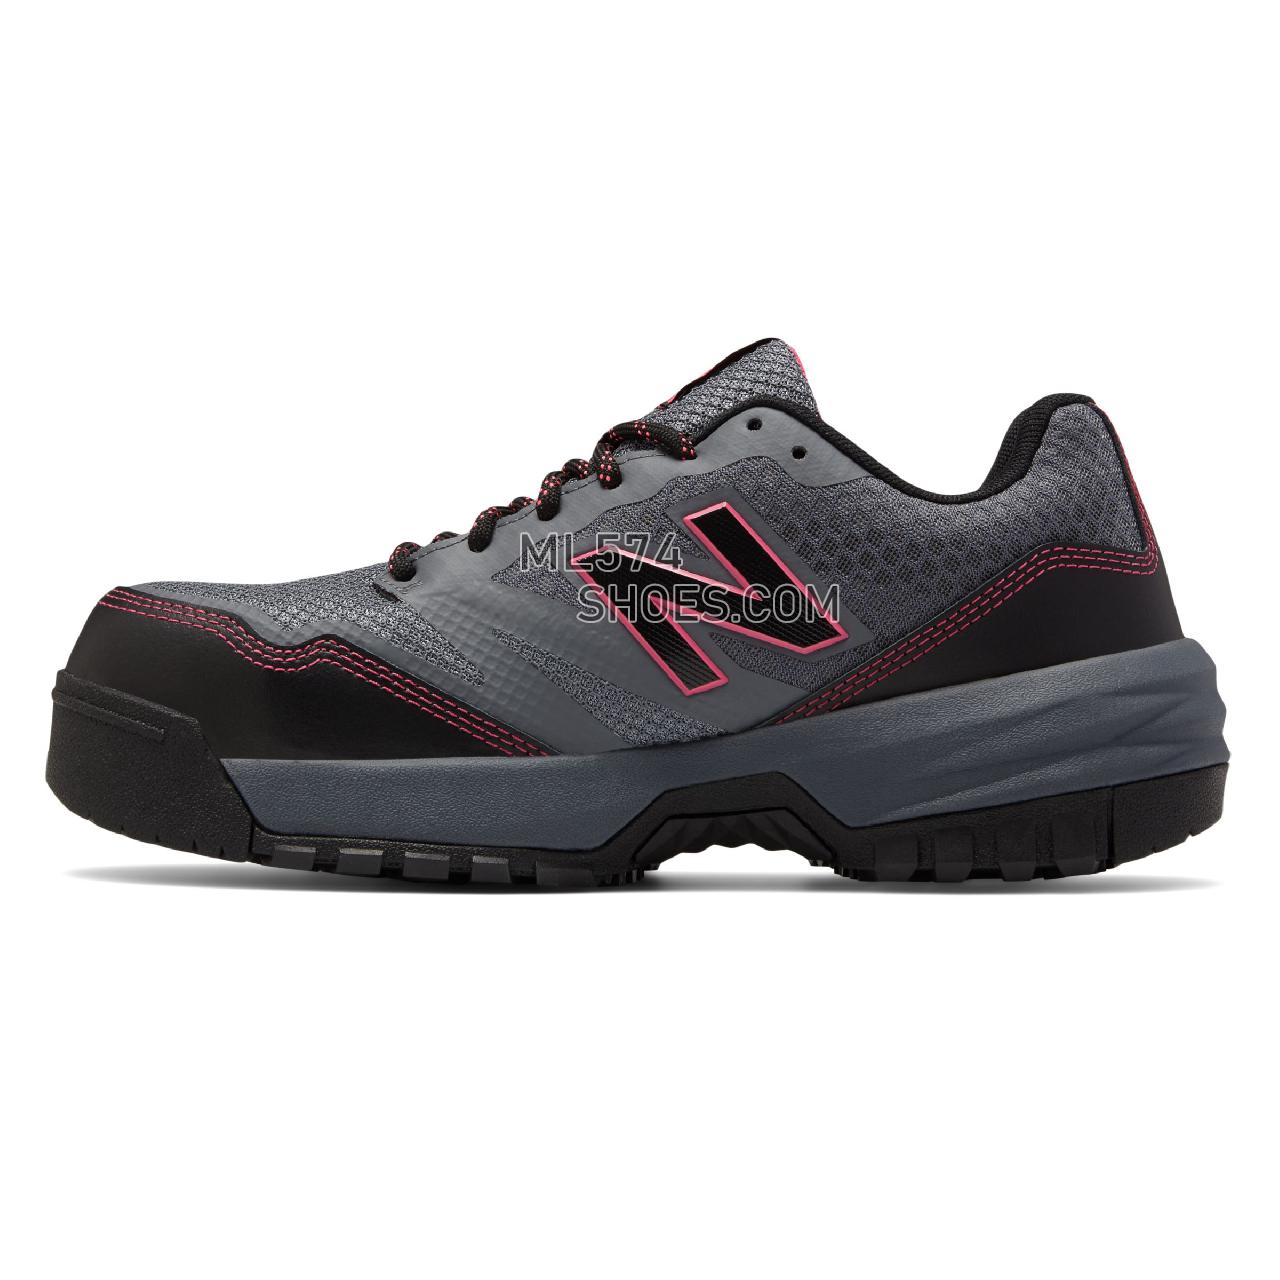 New Balance Composite Toe 589 - Women's 589 - Industrial Grey with Pink - WID589T1